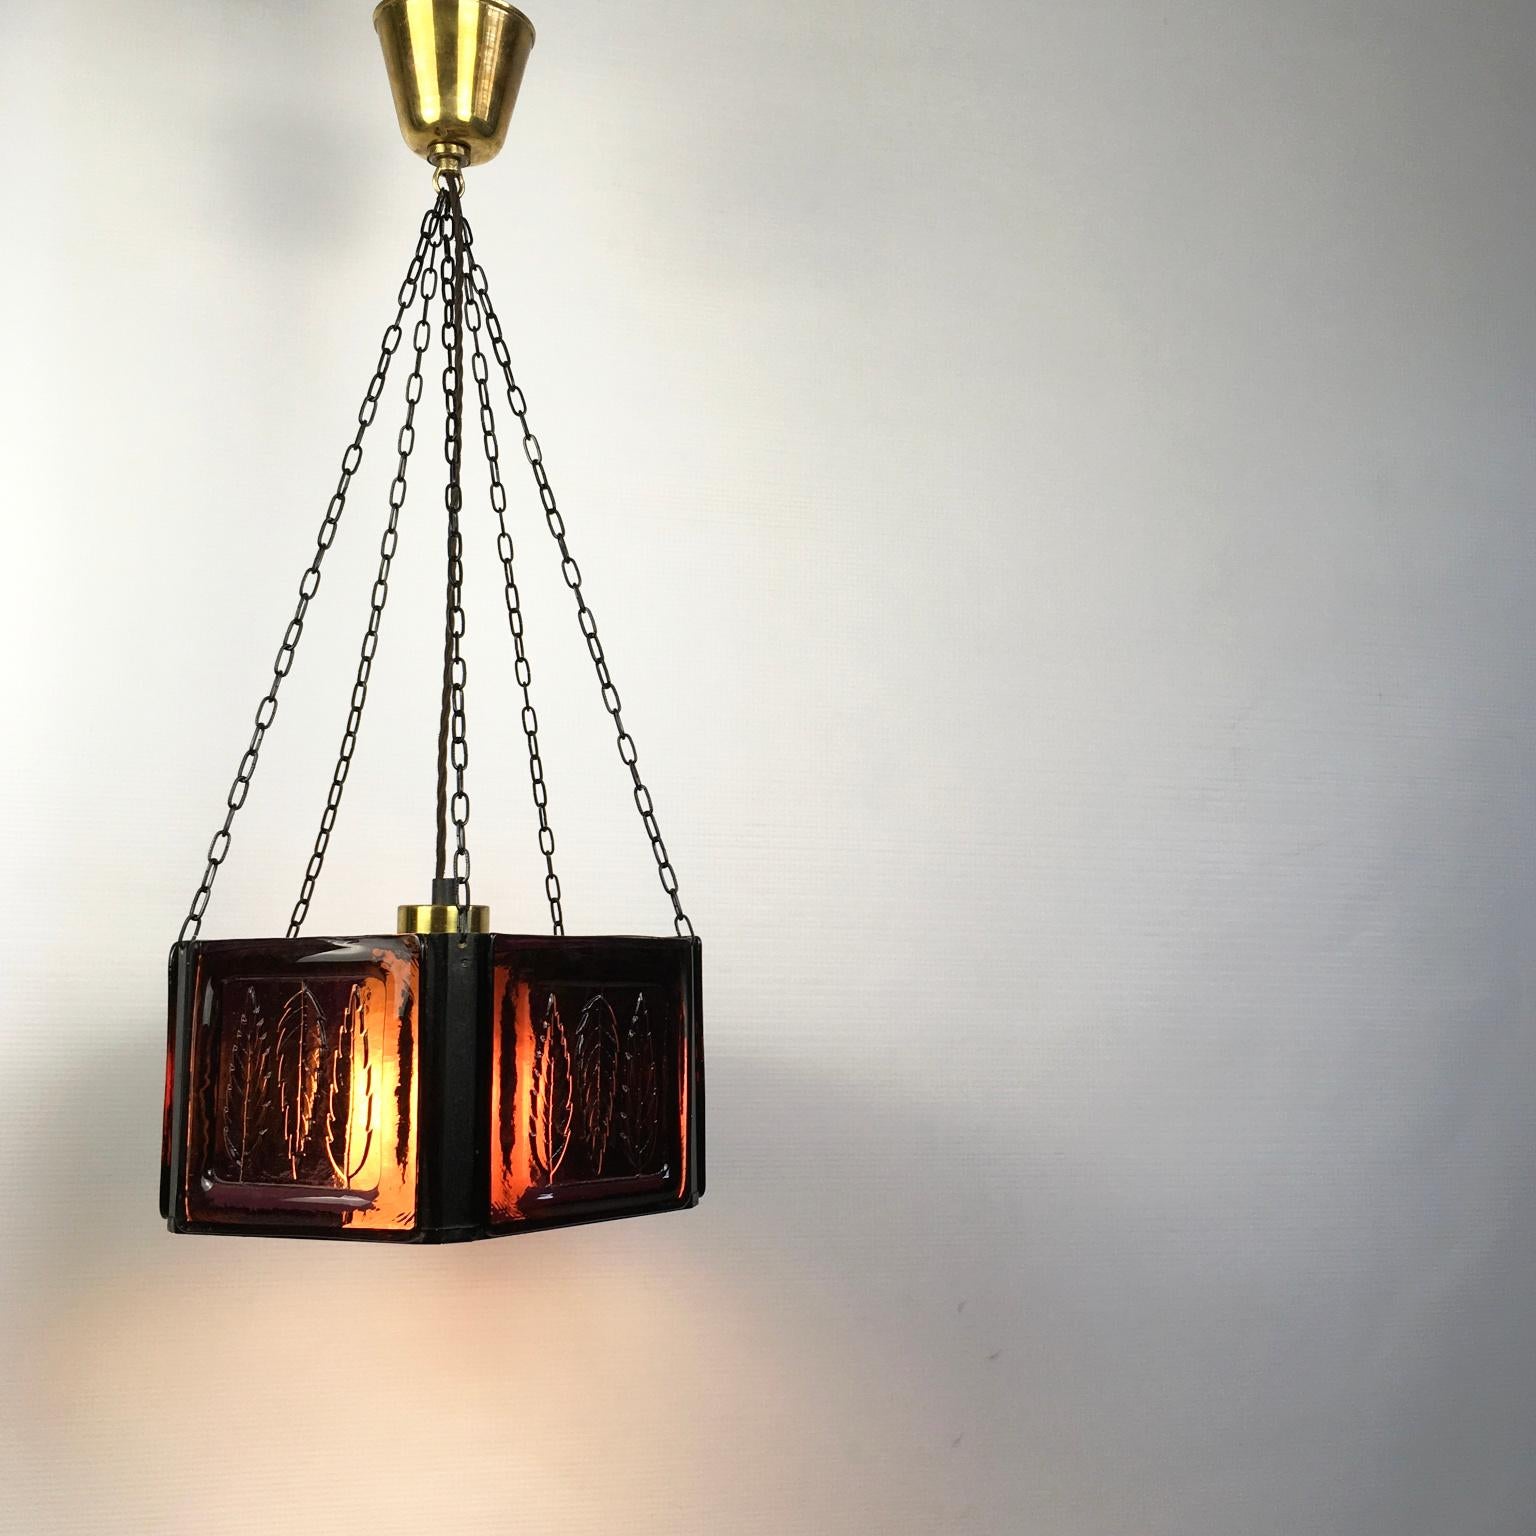 Pendant Lamp by Erik Höglund with Purple Glass for Boda Glasburk, Sweden, 1960s For Sale 2